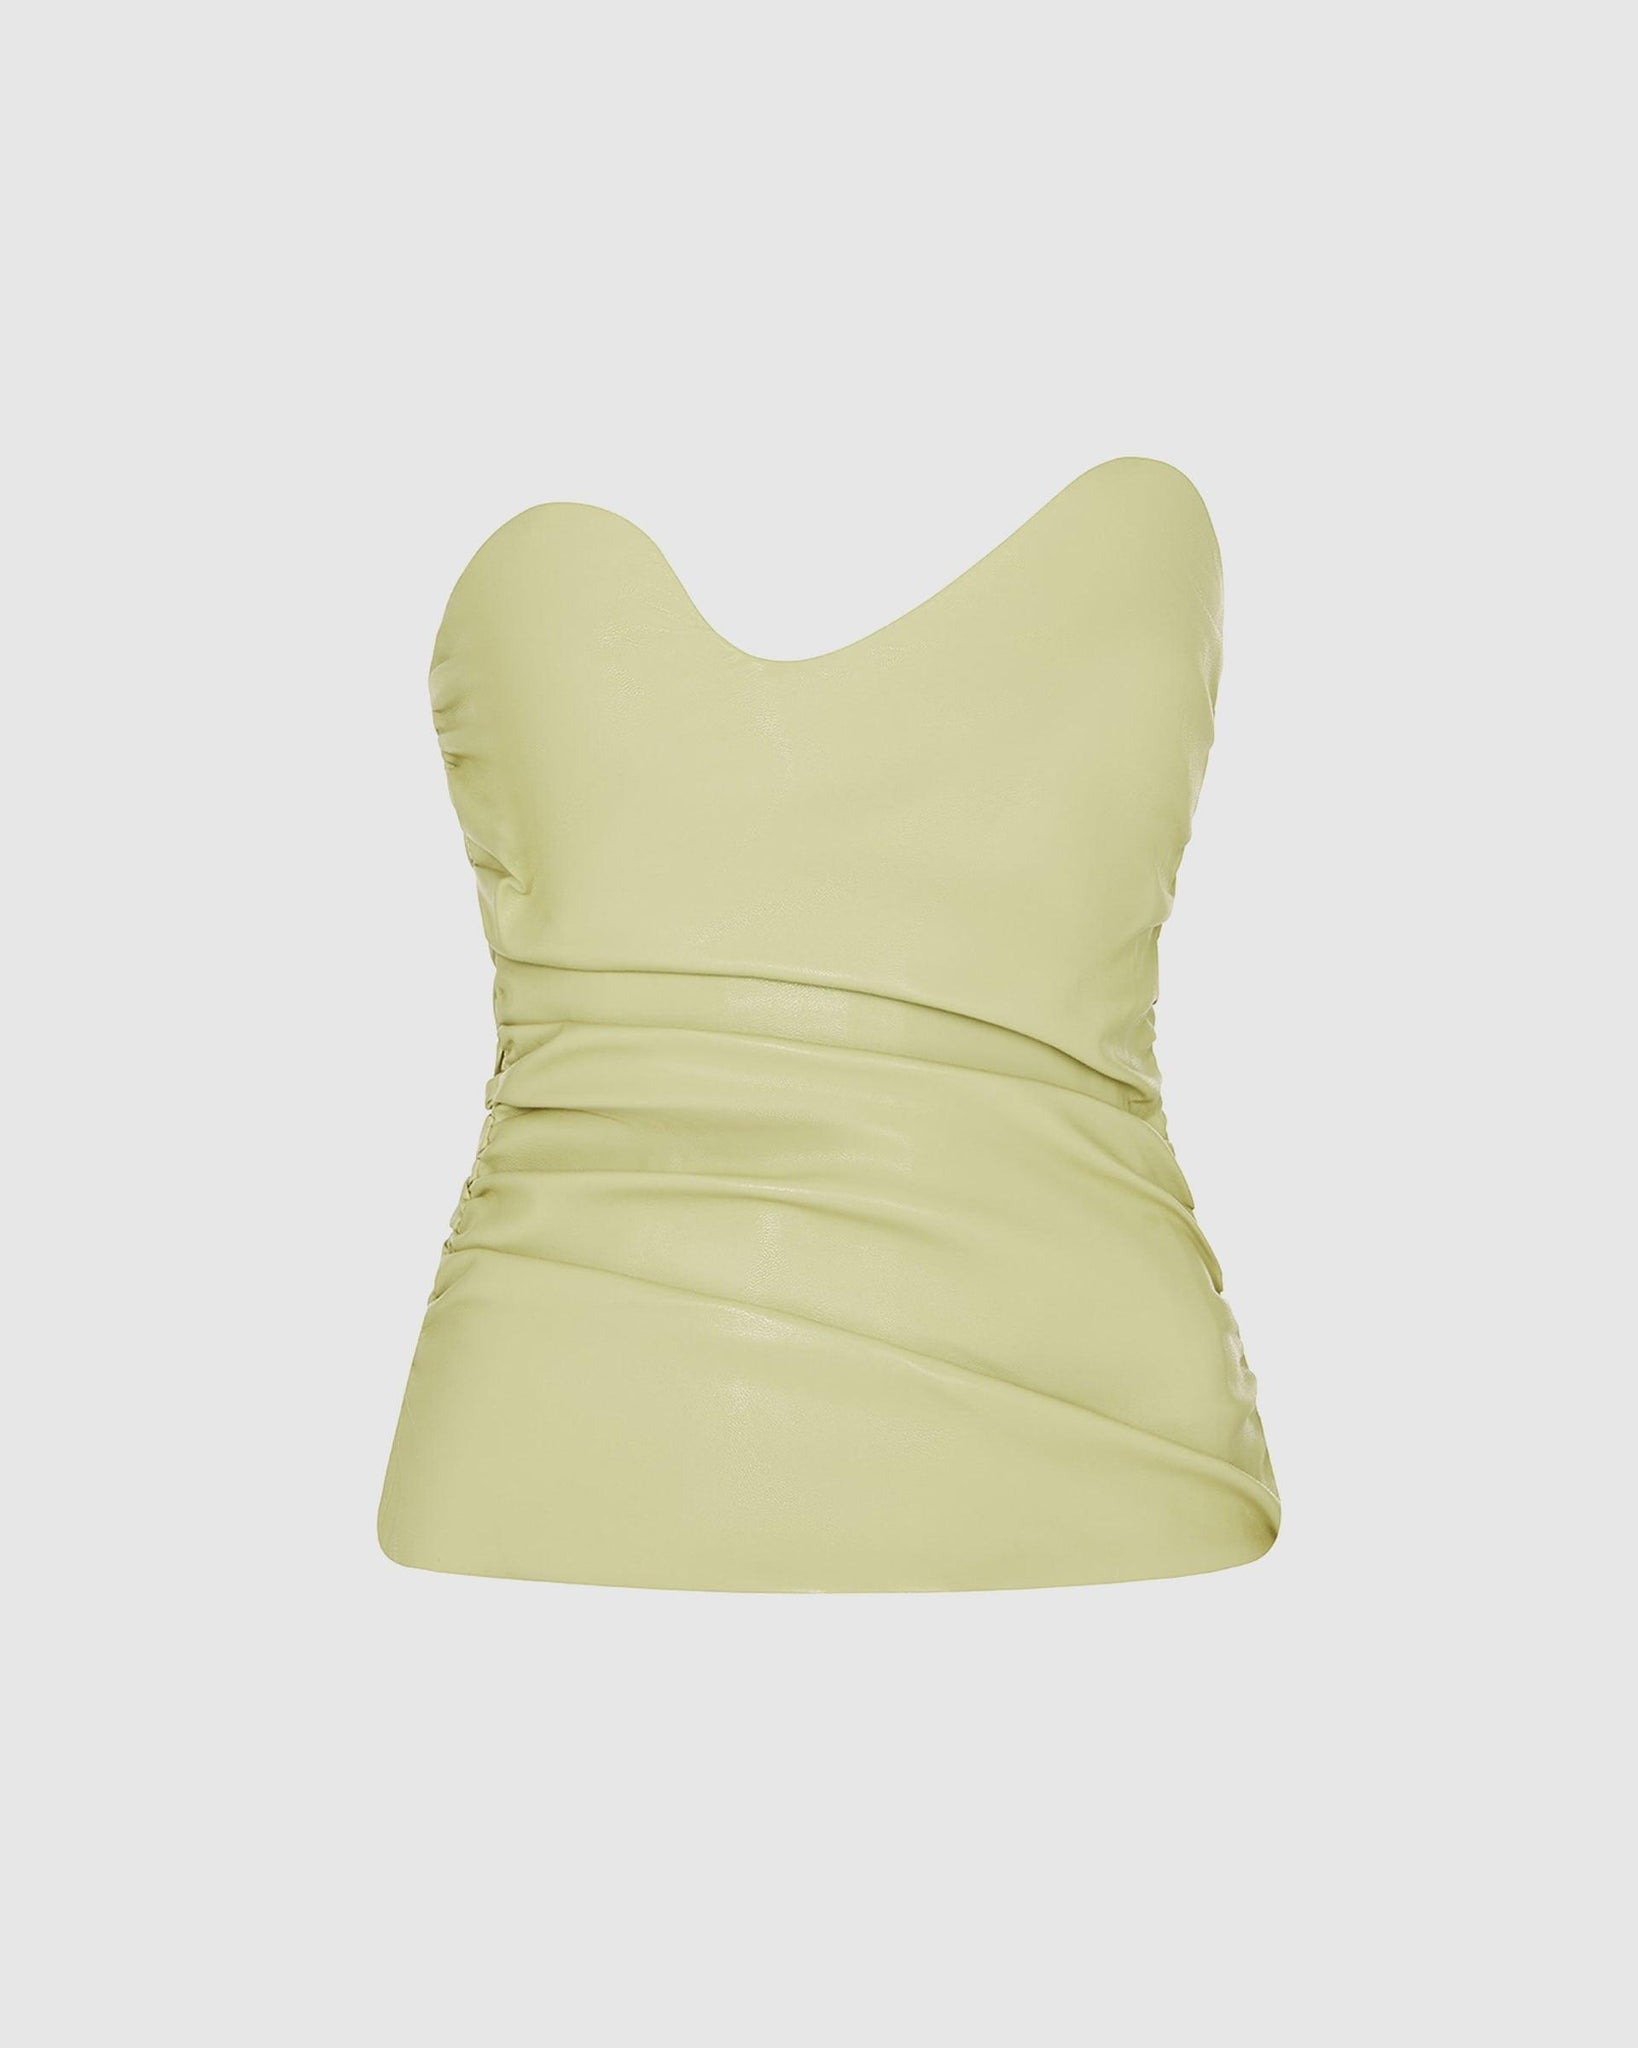 Asymmetric Bodice - {{ collection.title }} - Chinatown Country Club 